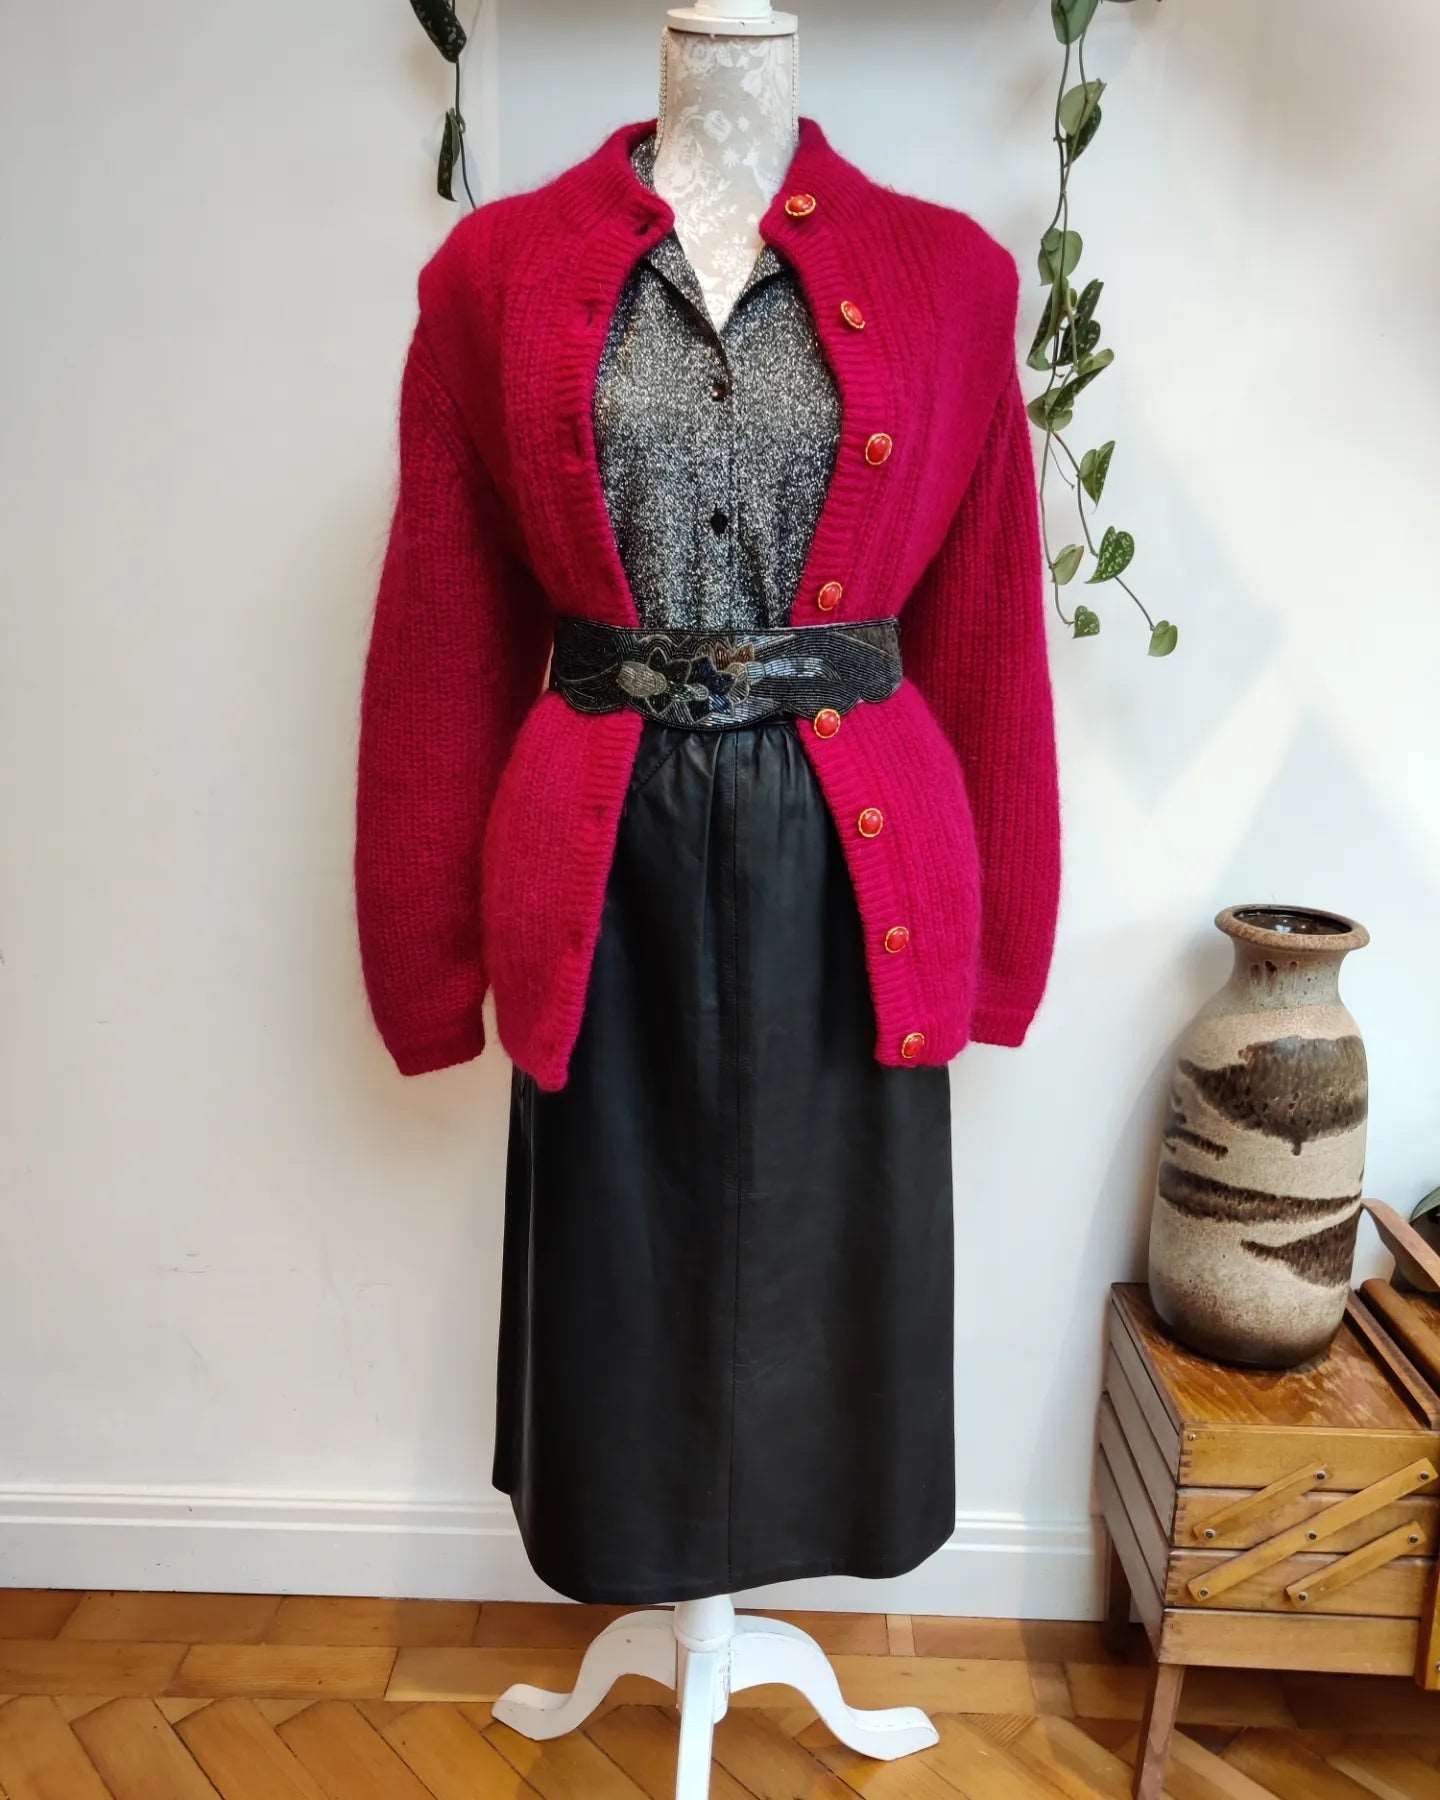 Stunning red mohair 80s cardigan. Lined. Size 8-14.